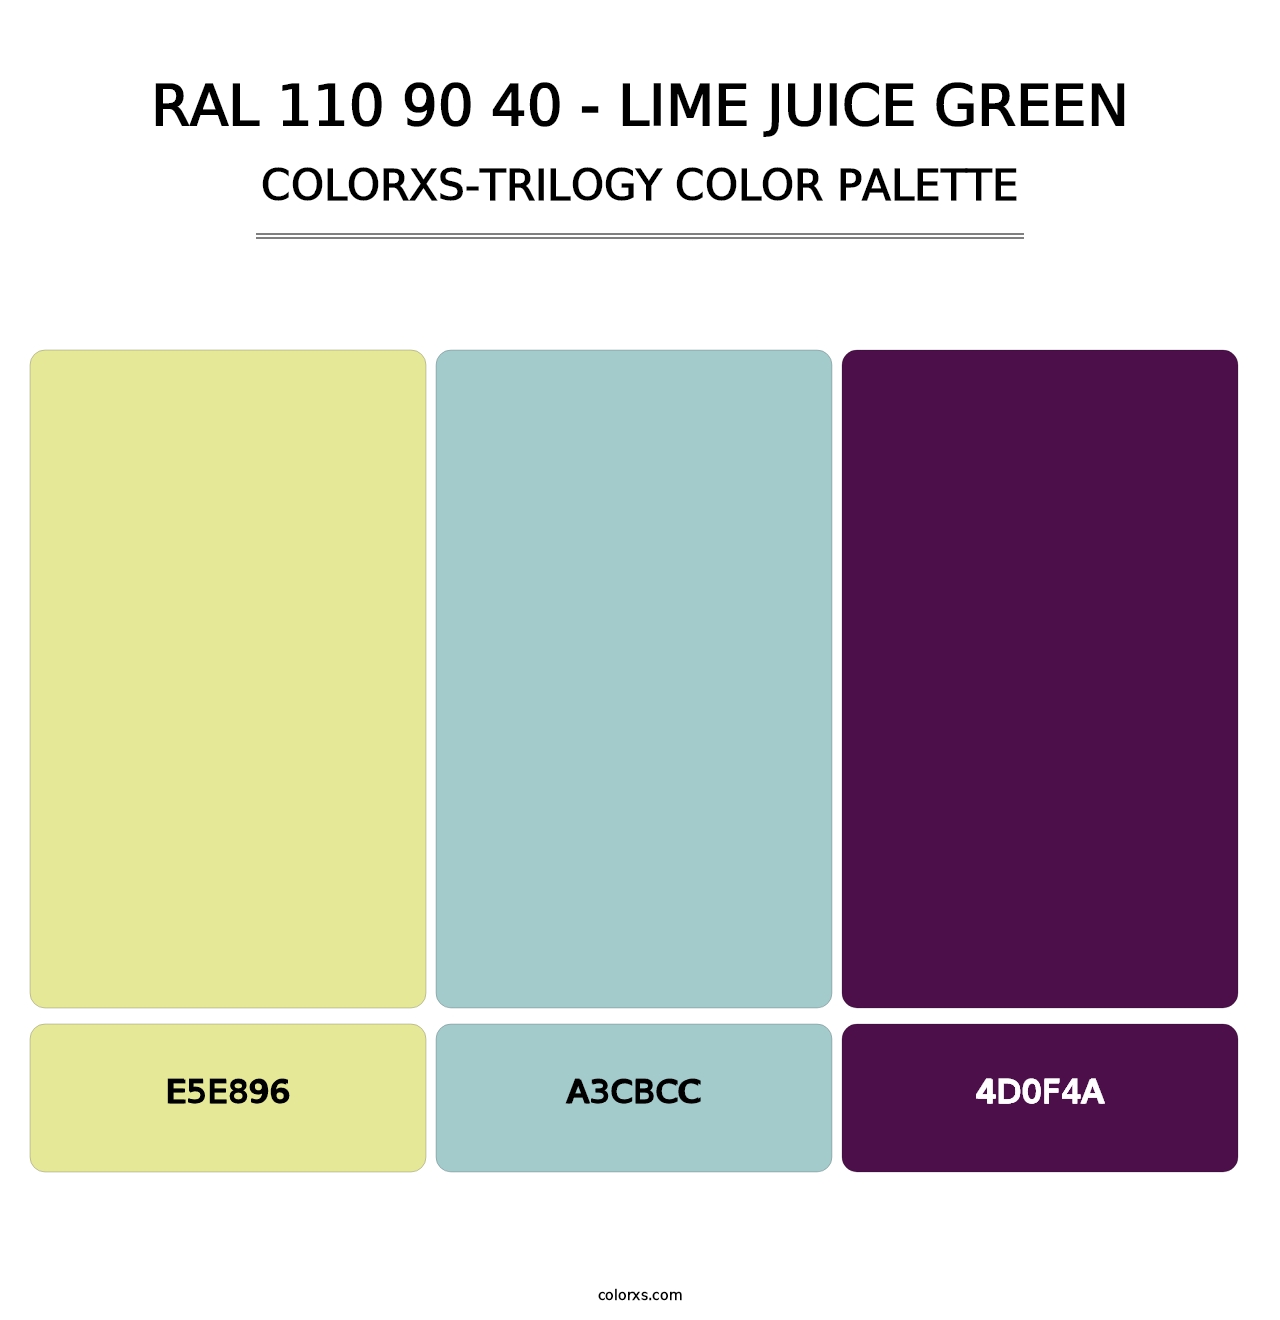 RAL 110 90 40 - Lime Juice Green - Colorxs Trilogy Palette